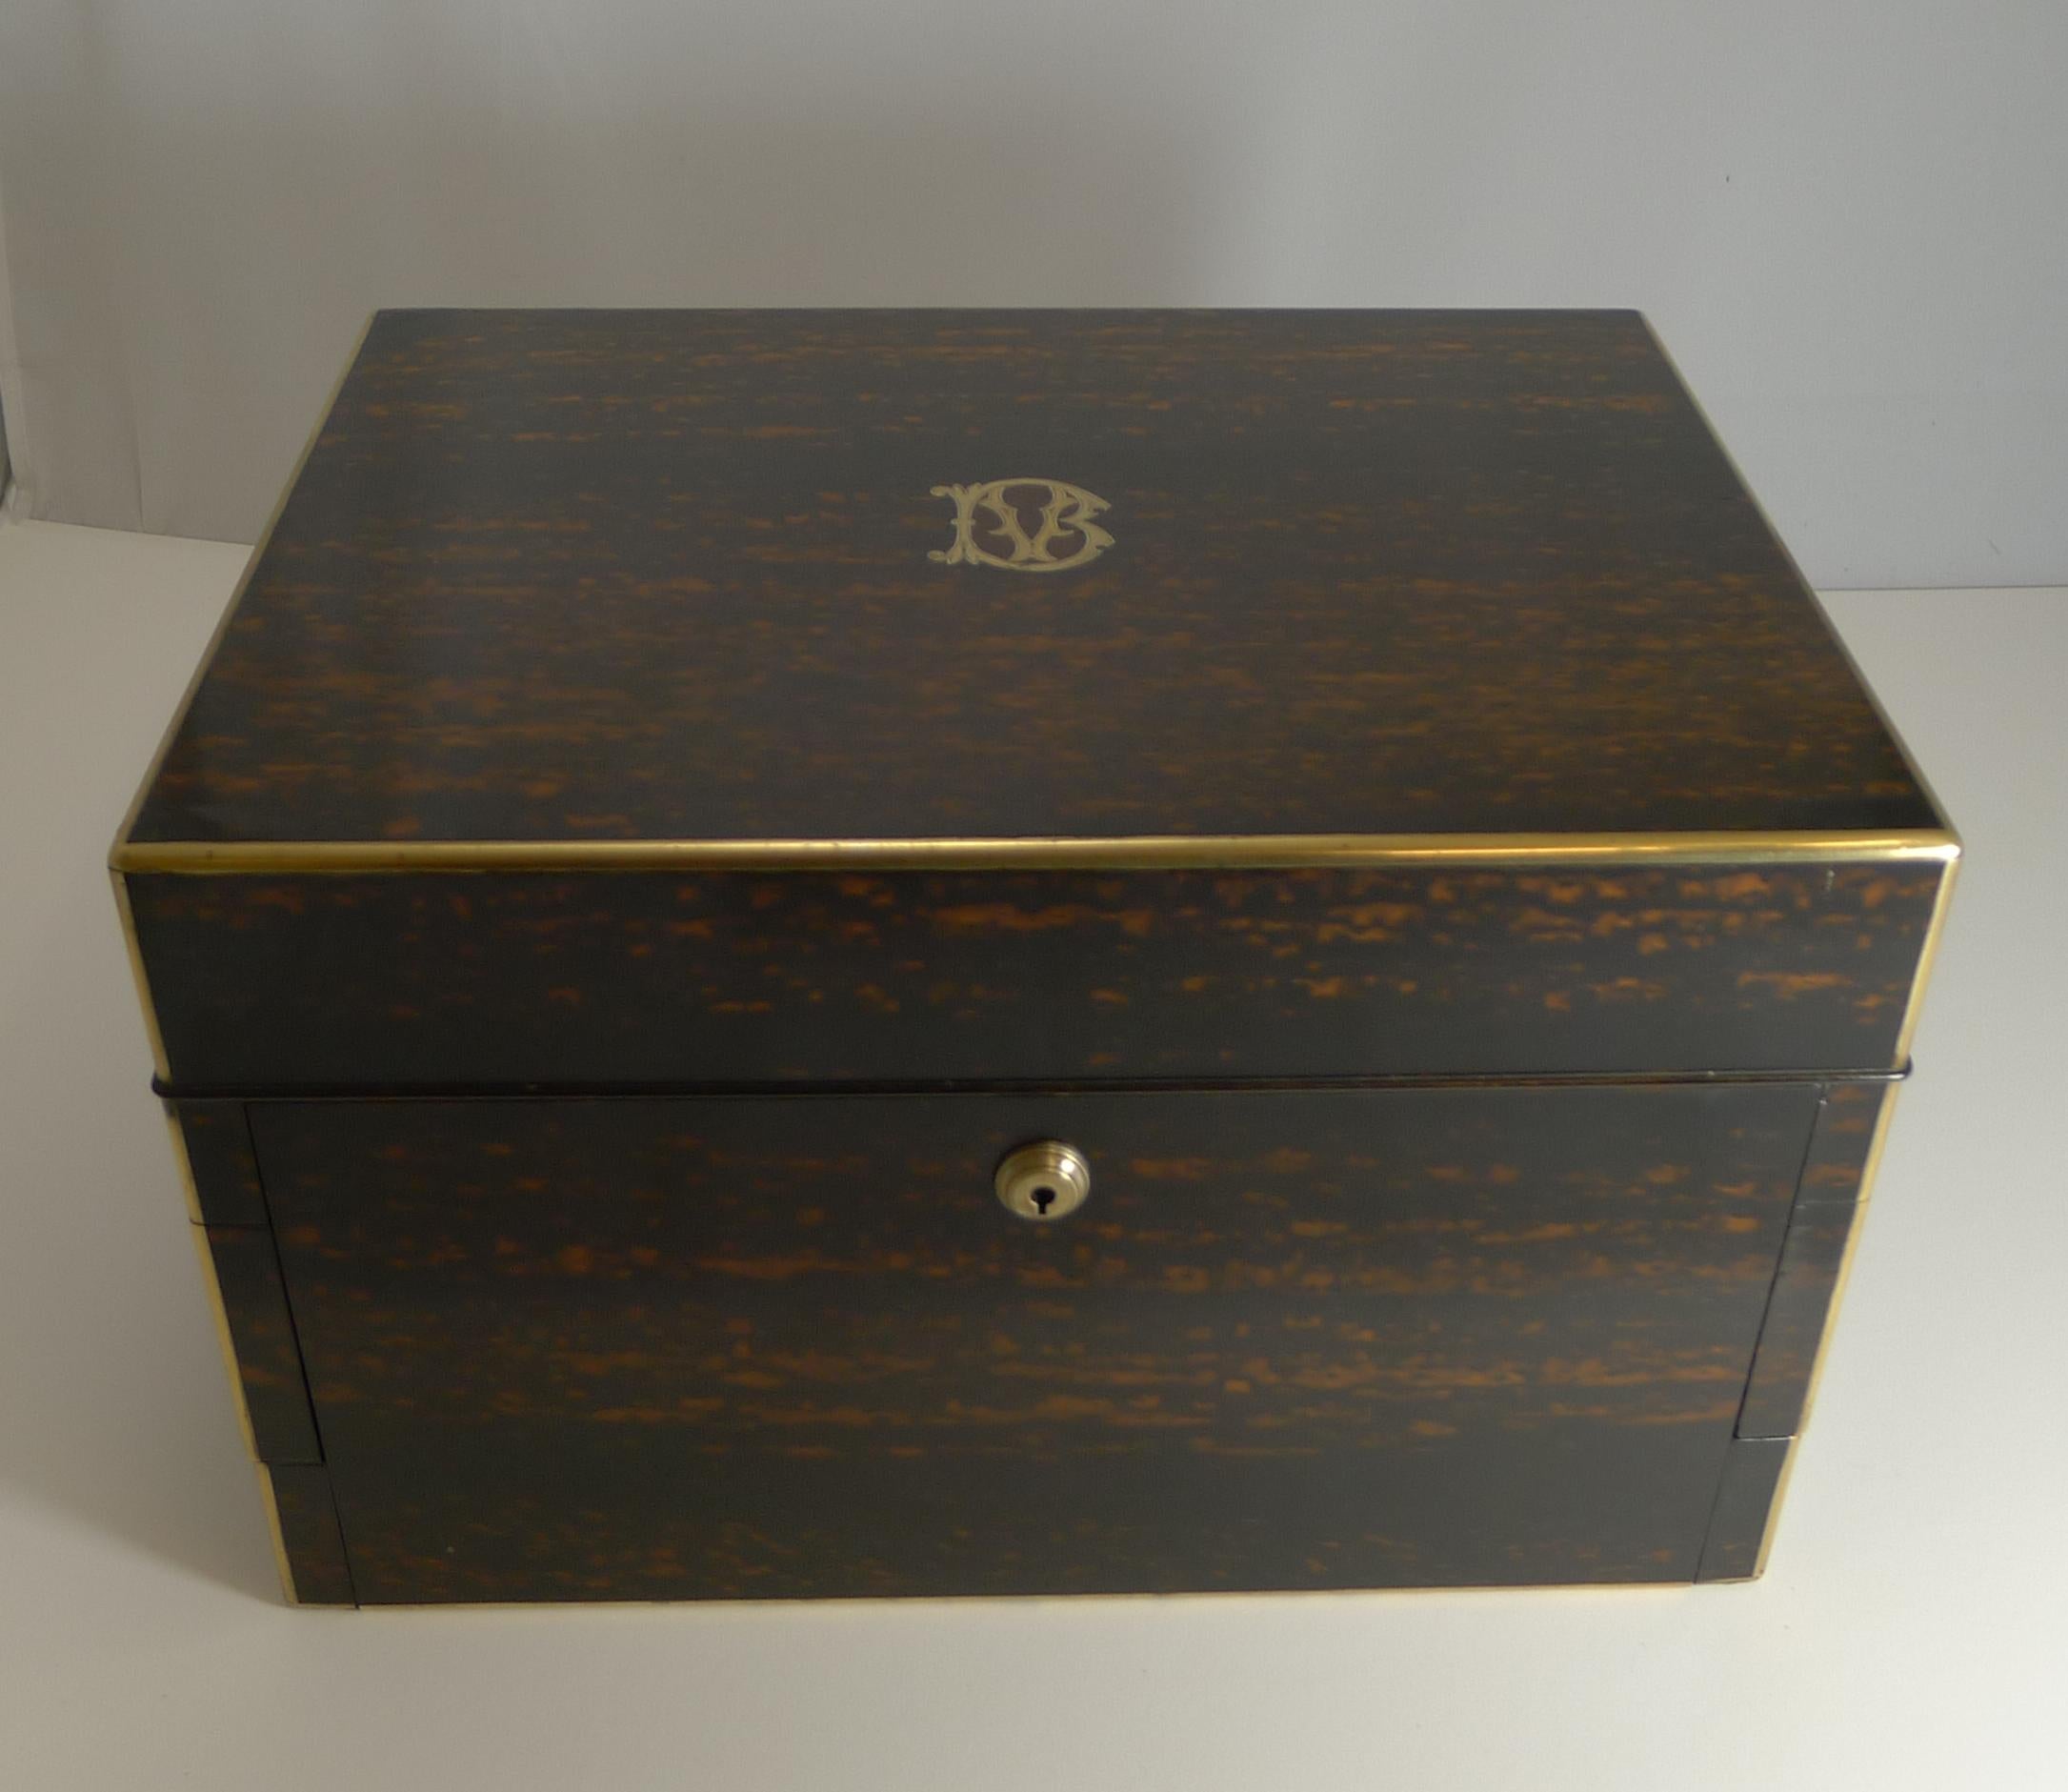 Grand Victorian English jewelry boxes like this come along very rarely, this one having all the bells and whistles with secret compartments everywhere!

Made from exotic Coromandal, the box is fully brass bound, the lid inlaid with the original